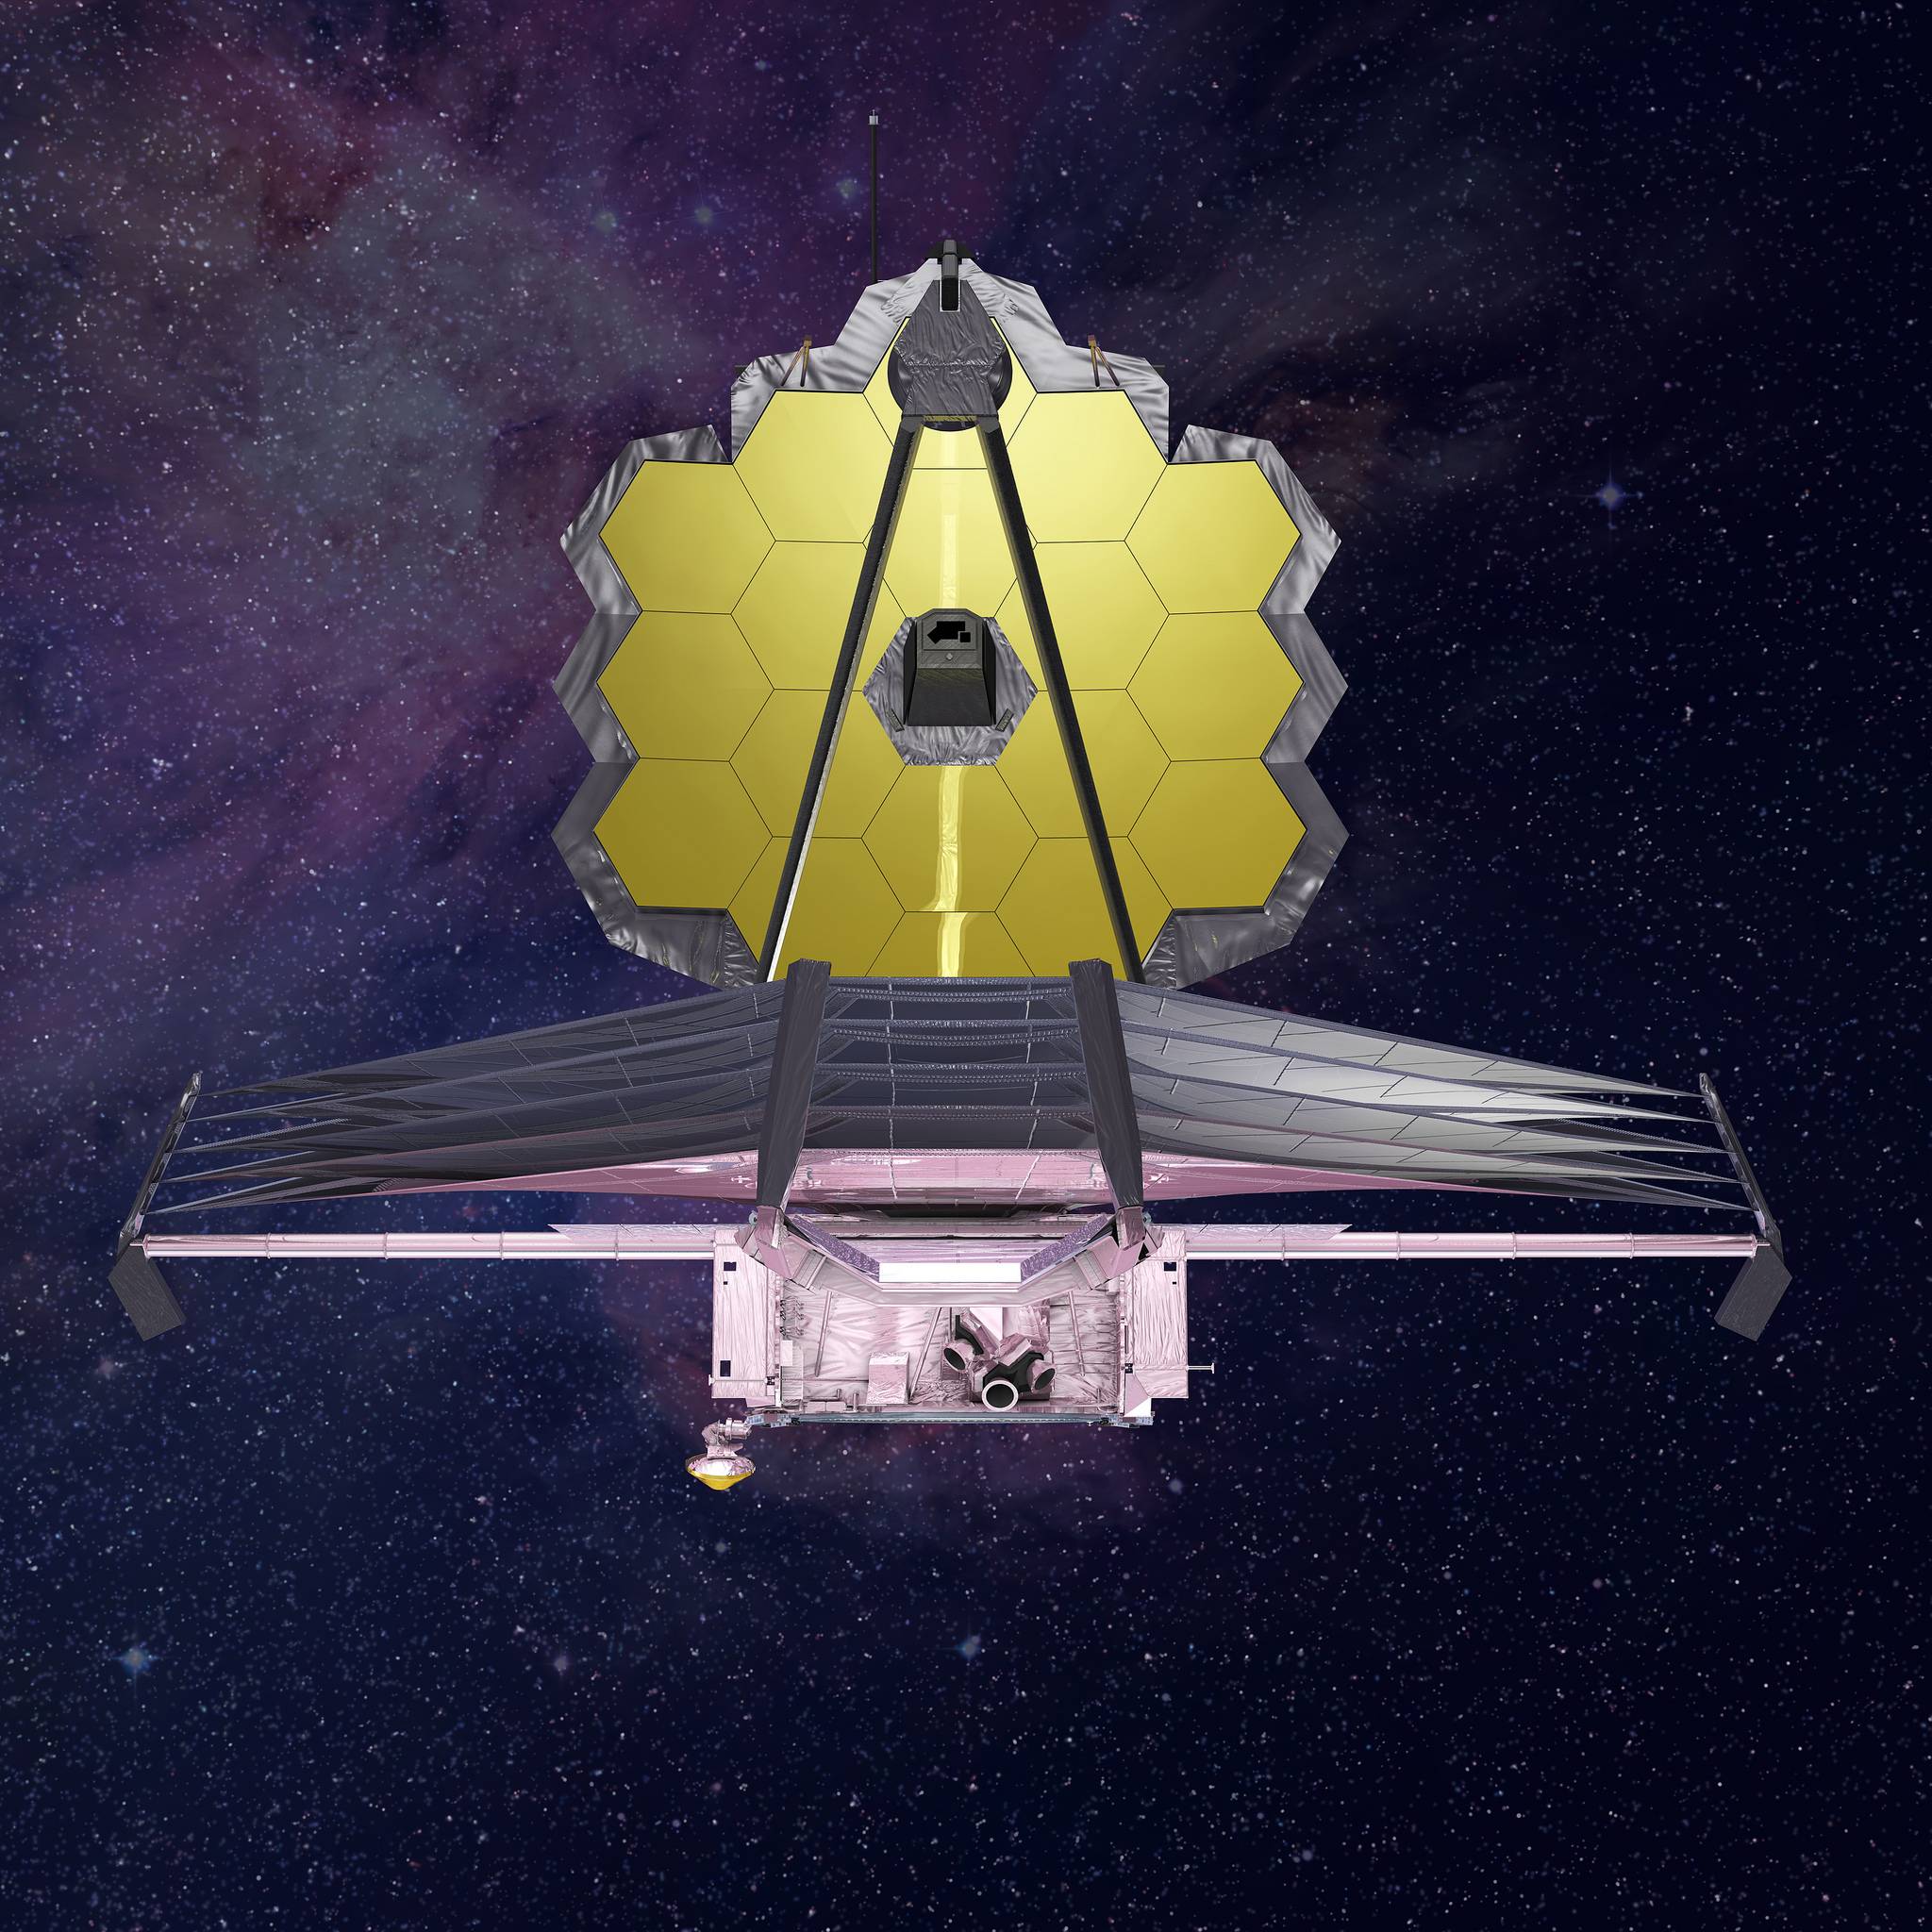 Rendition of James Webb Space Telescope (by NASA).